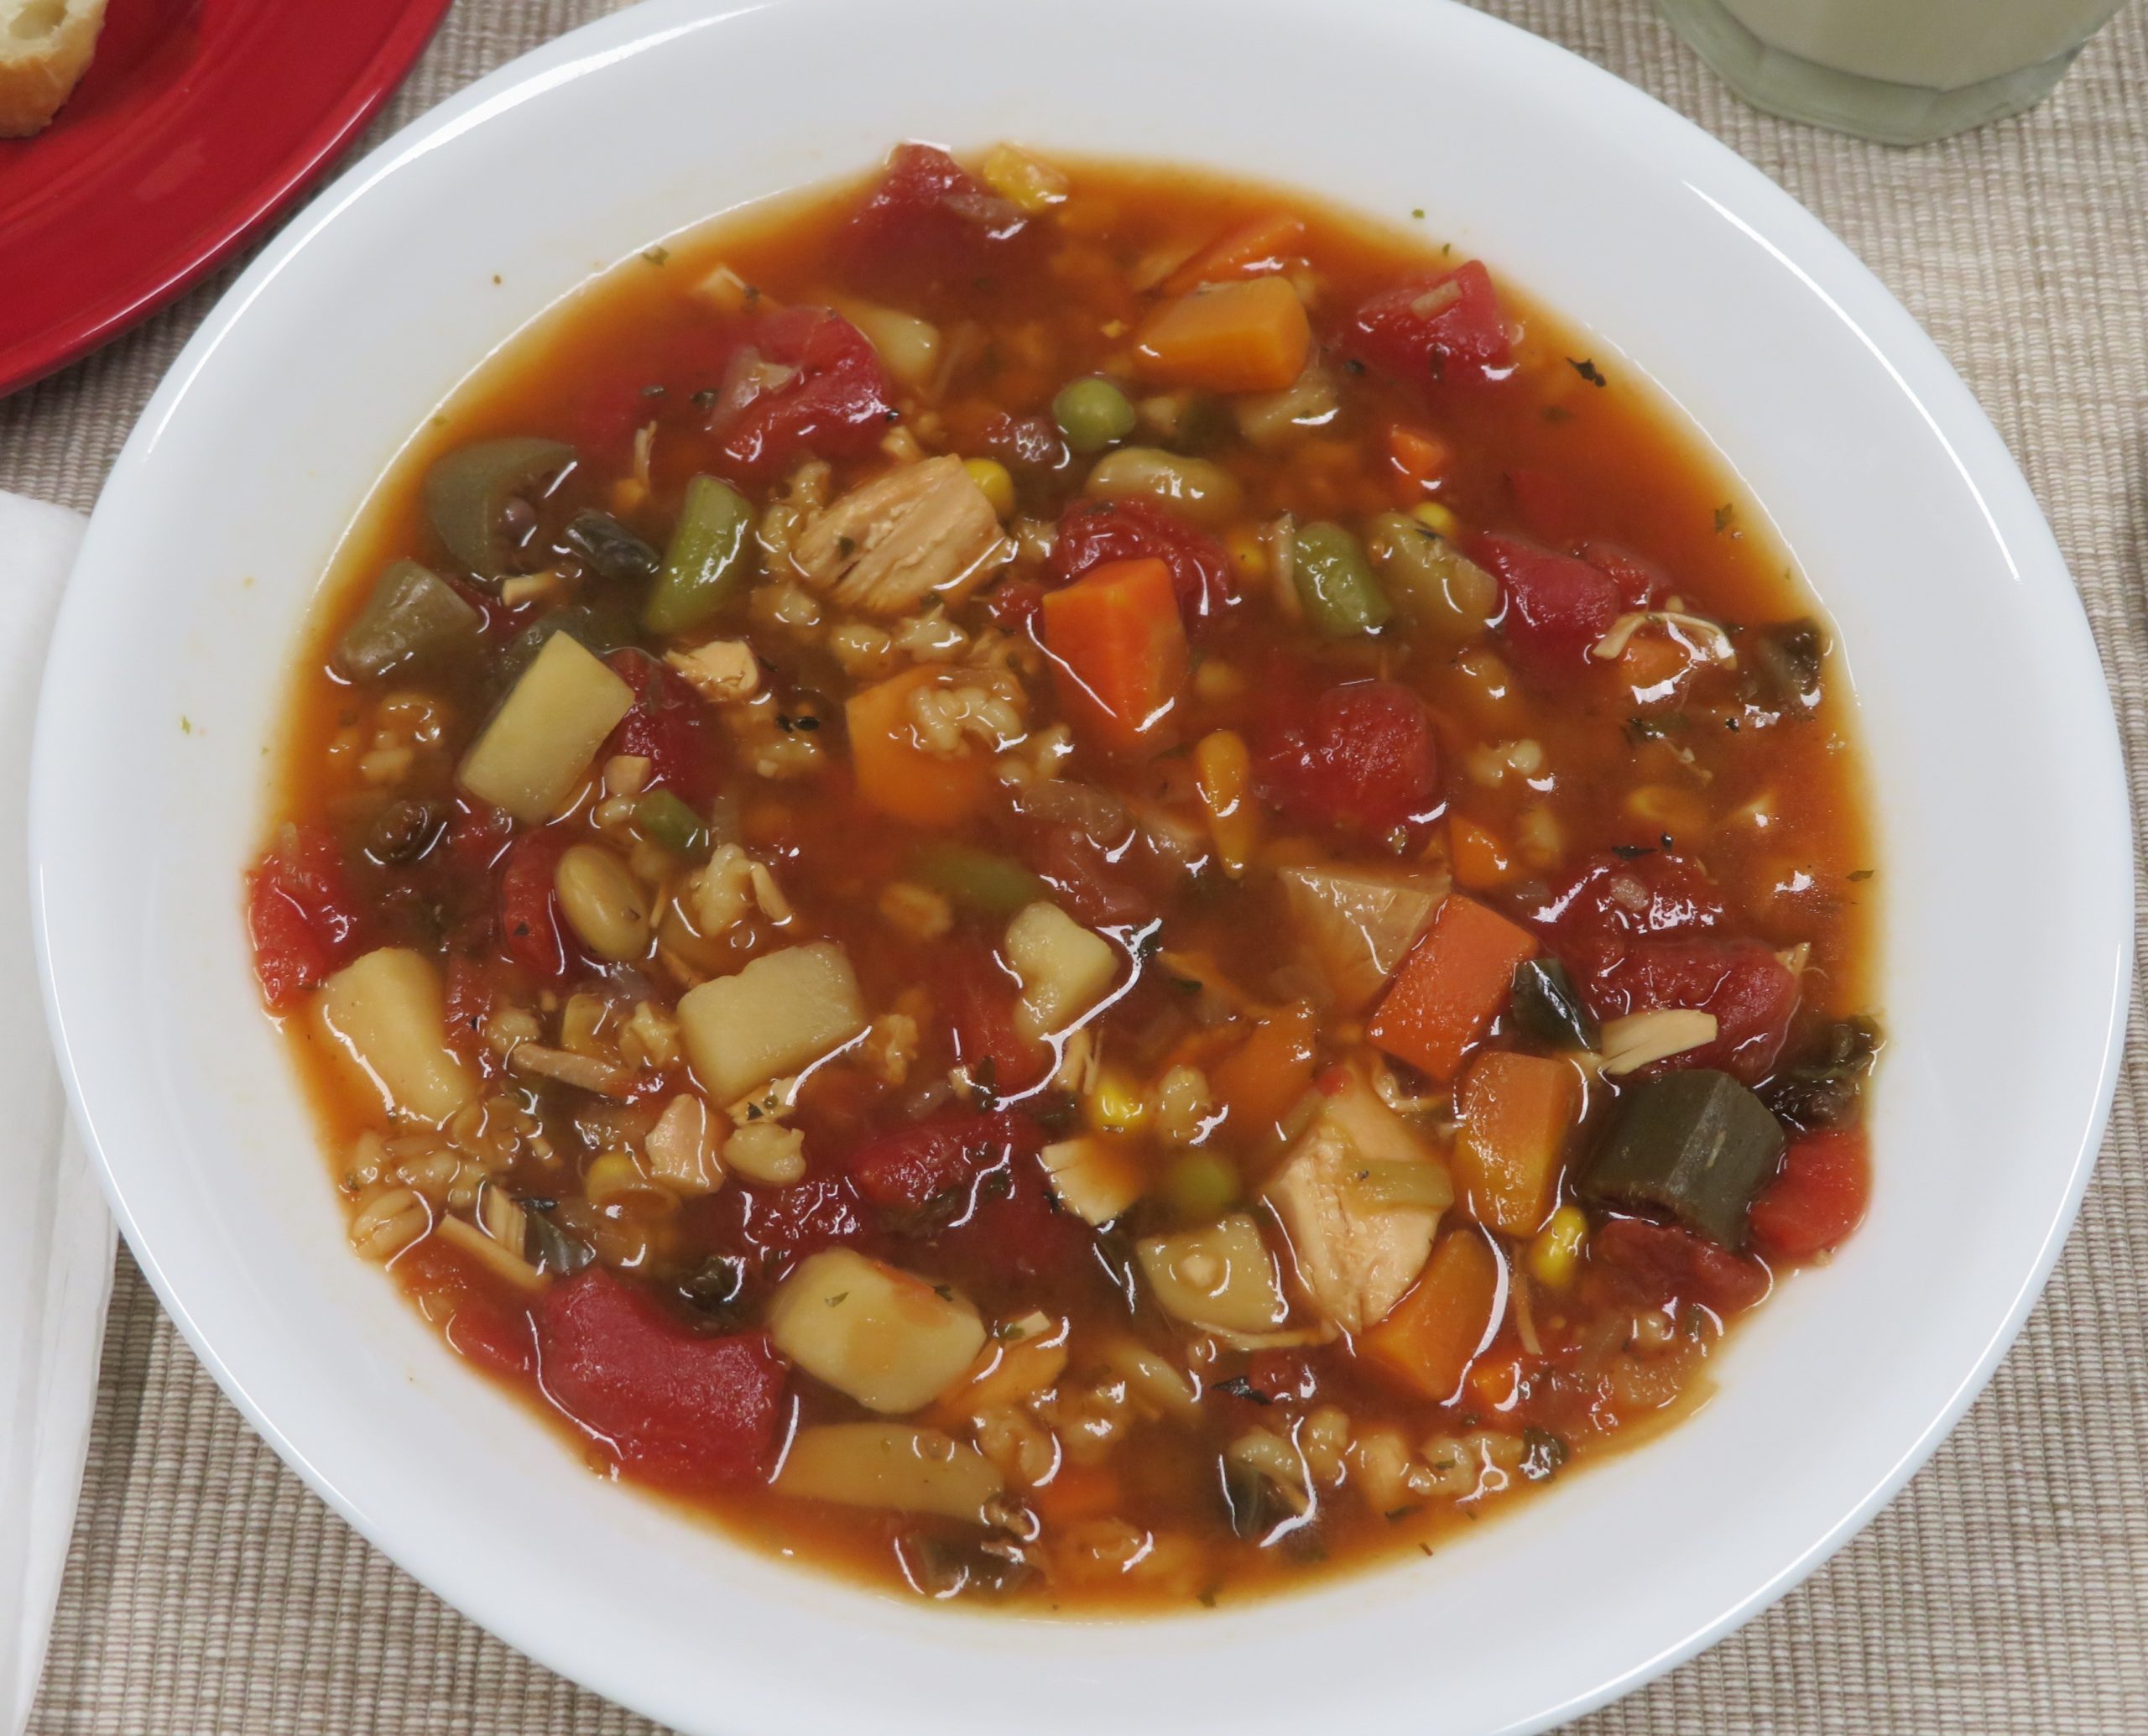 A bowl of Turkey Vegetable Soup adapted to the pantry